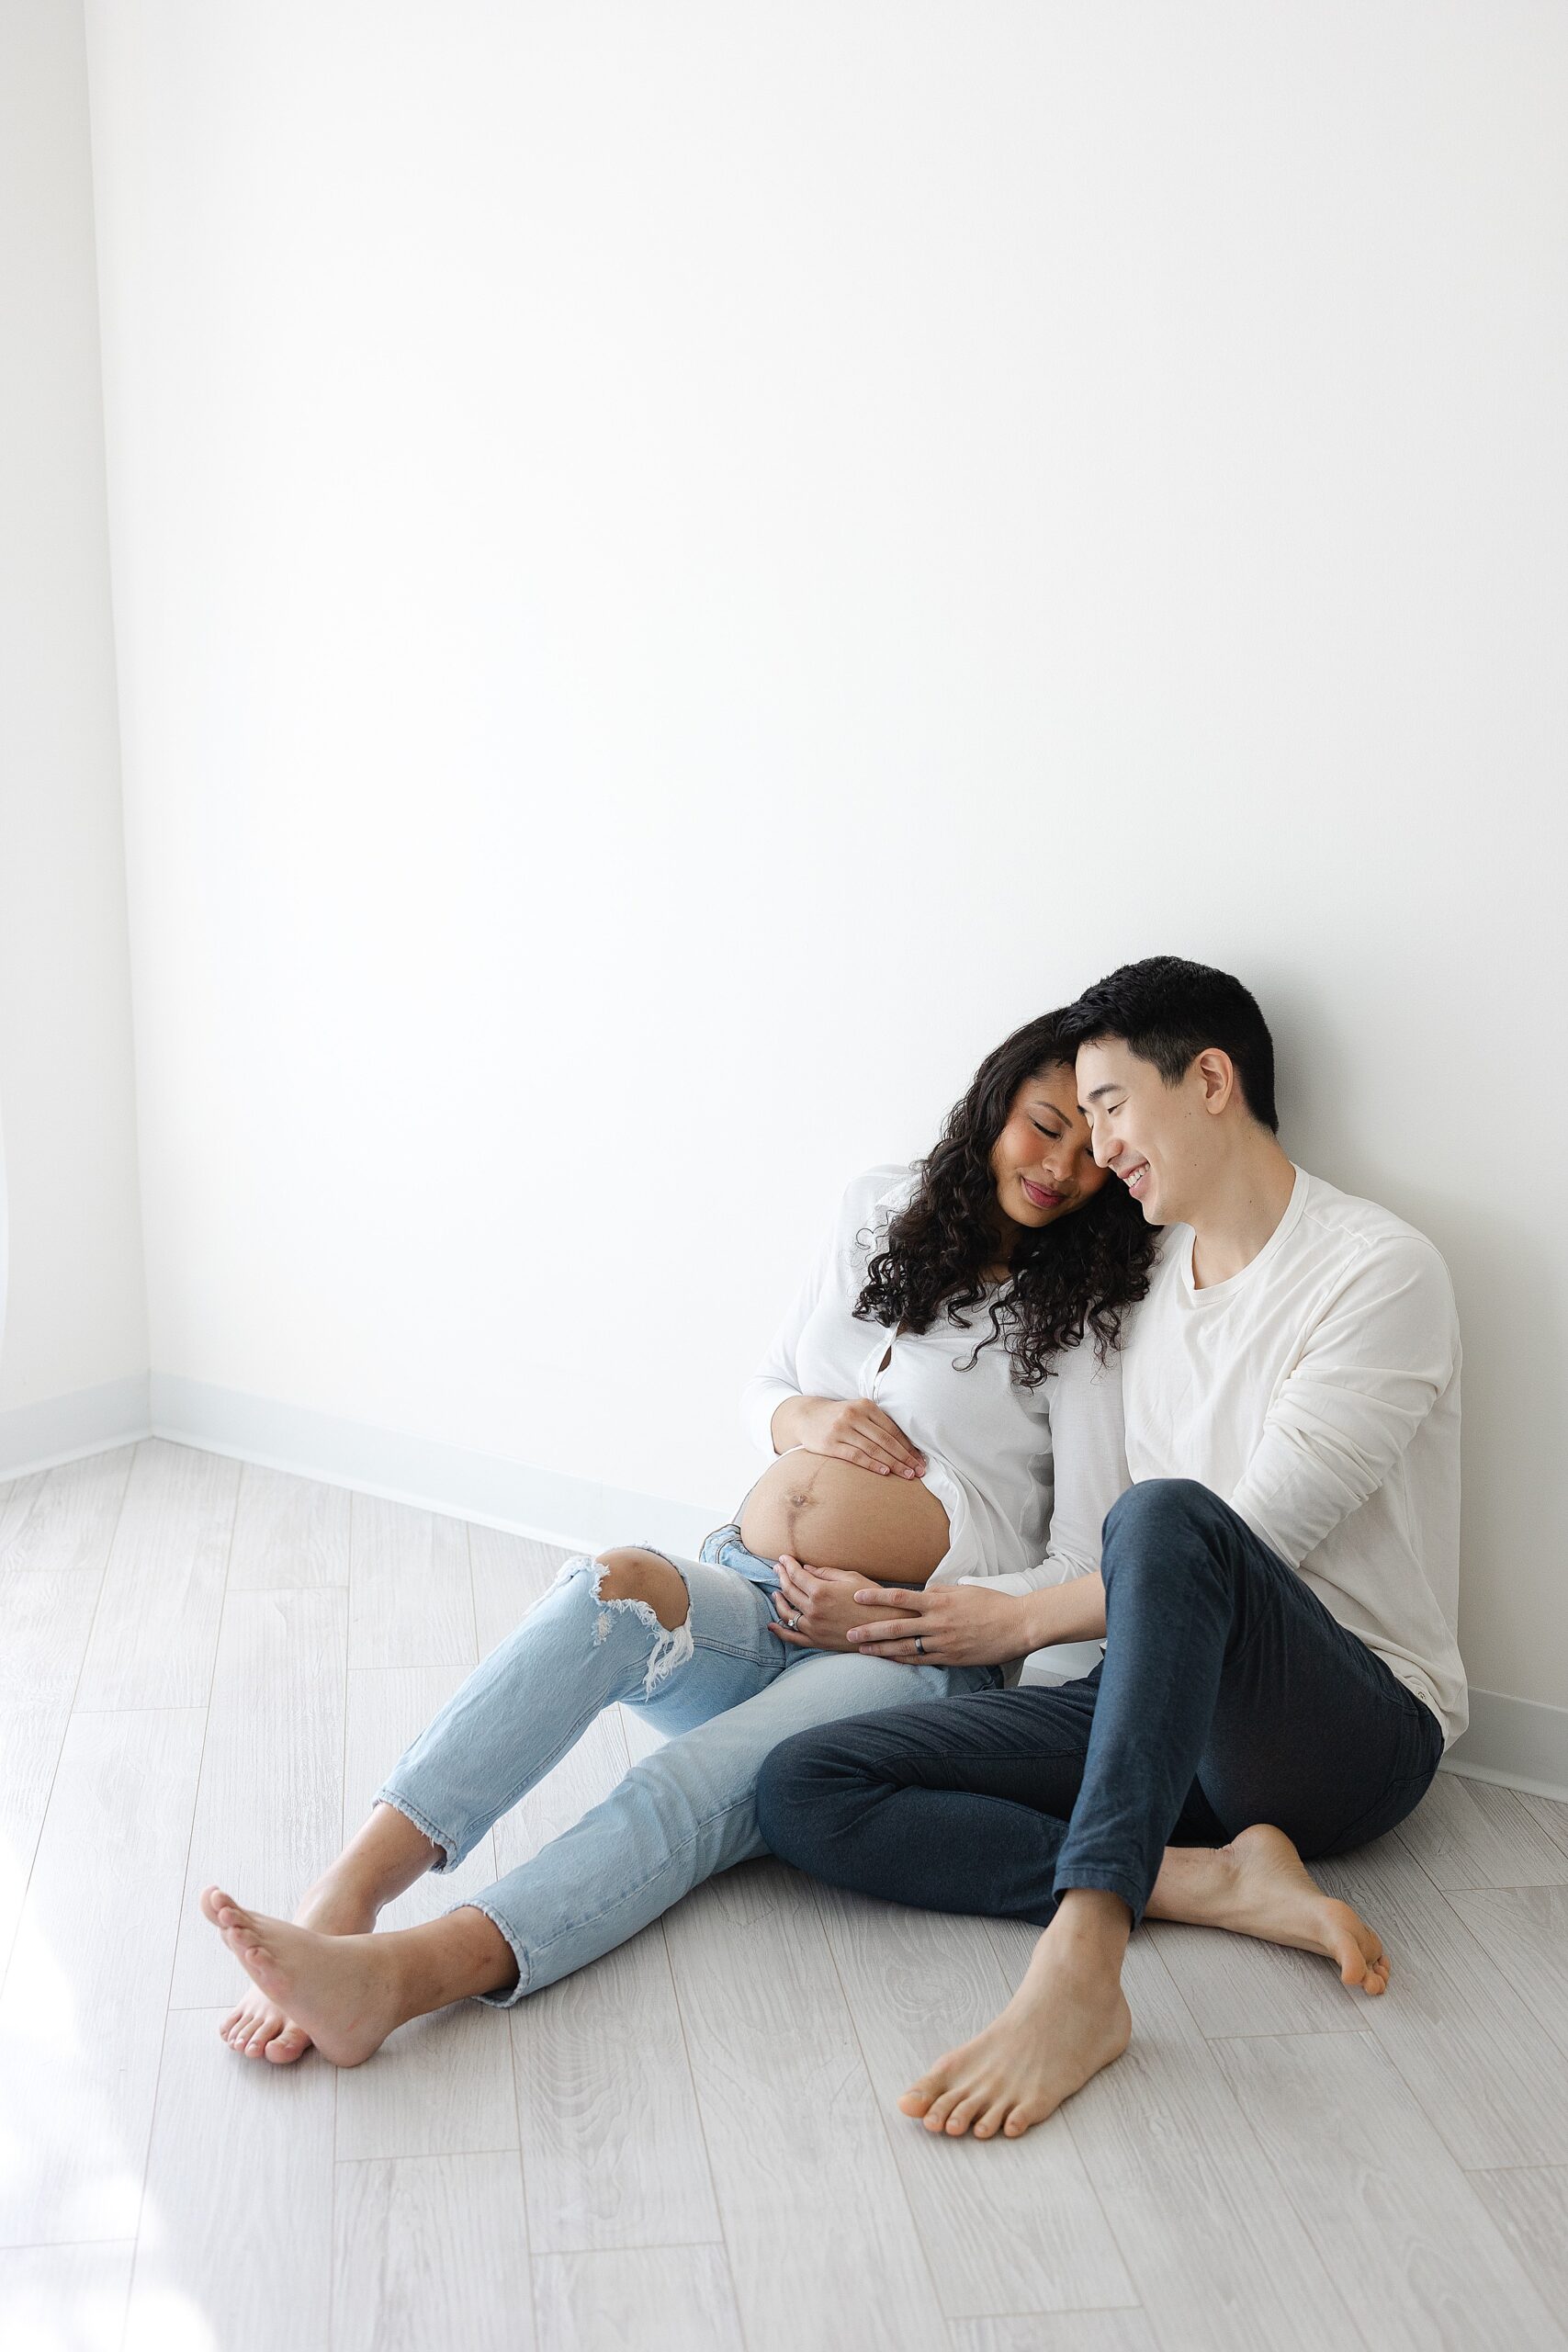 Happy expecting parents hold the bump while snuggling against a wall on the floor in jeans and white shirts after visiting Indianapolis Birthing Centers